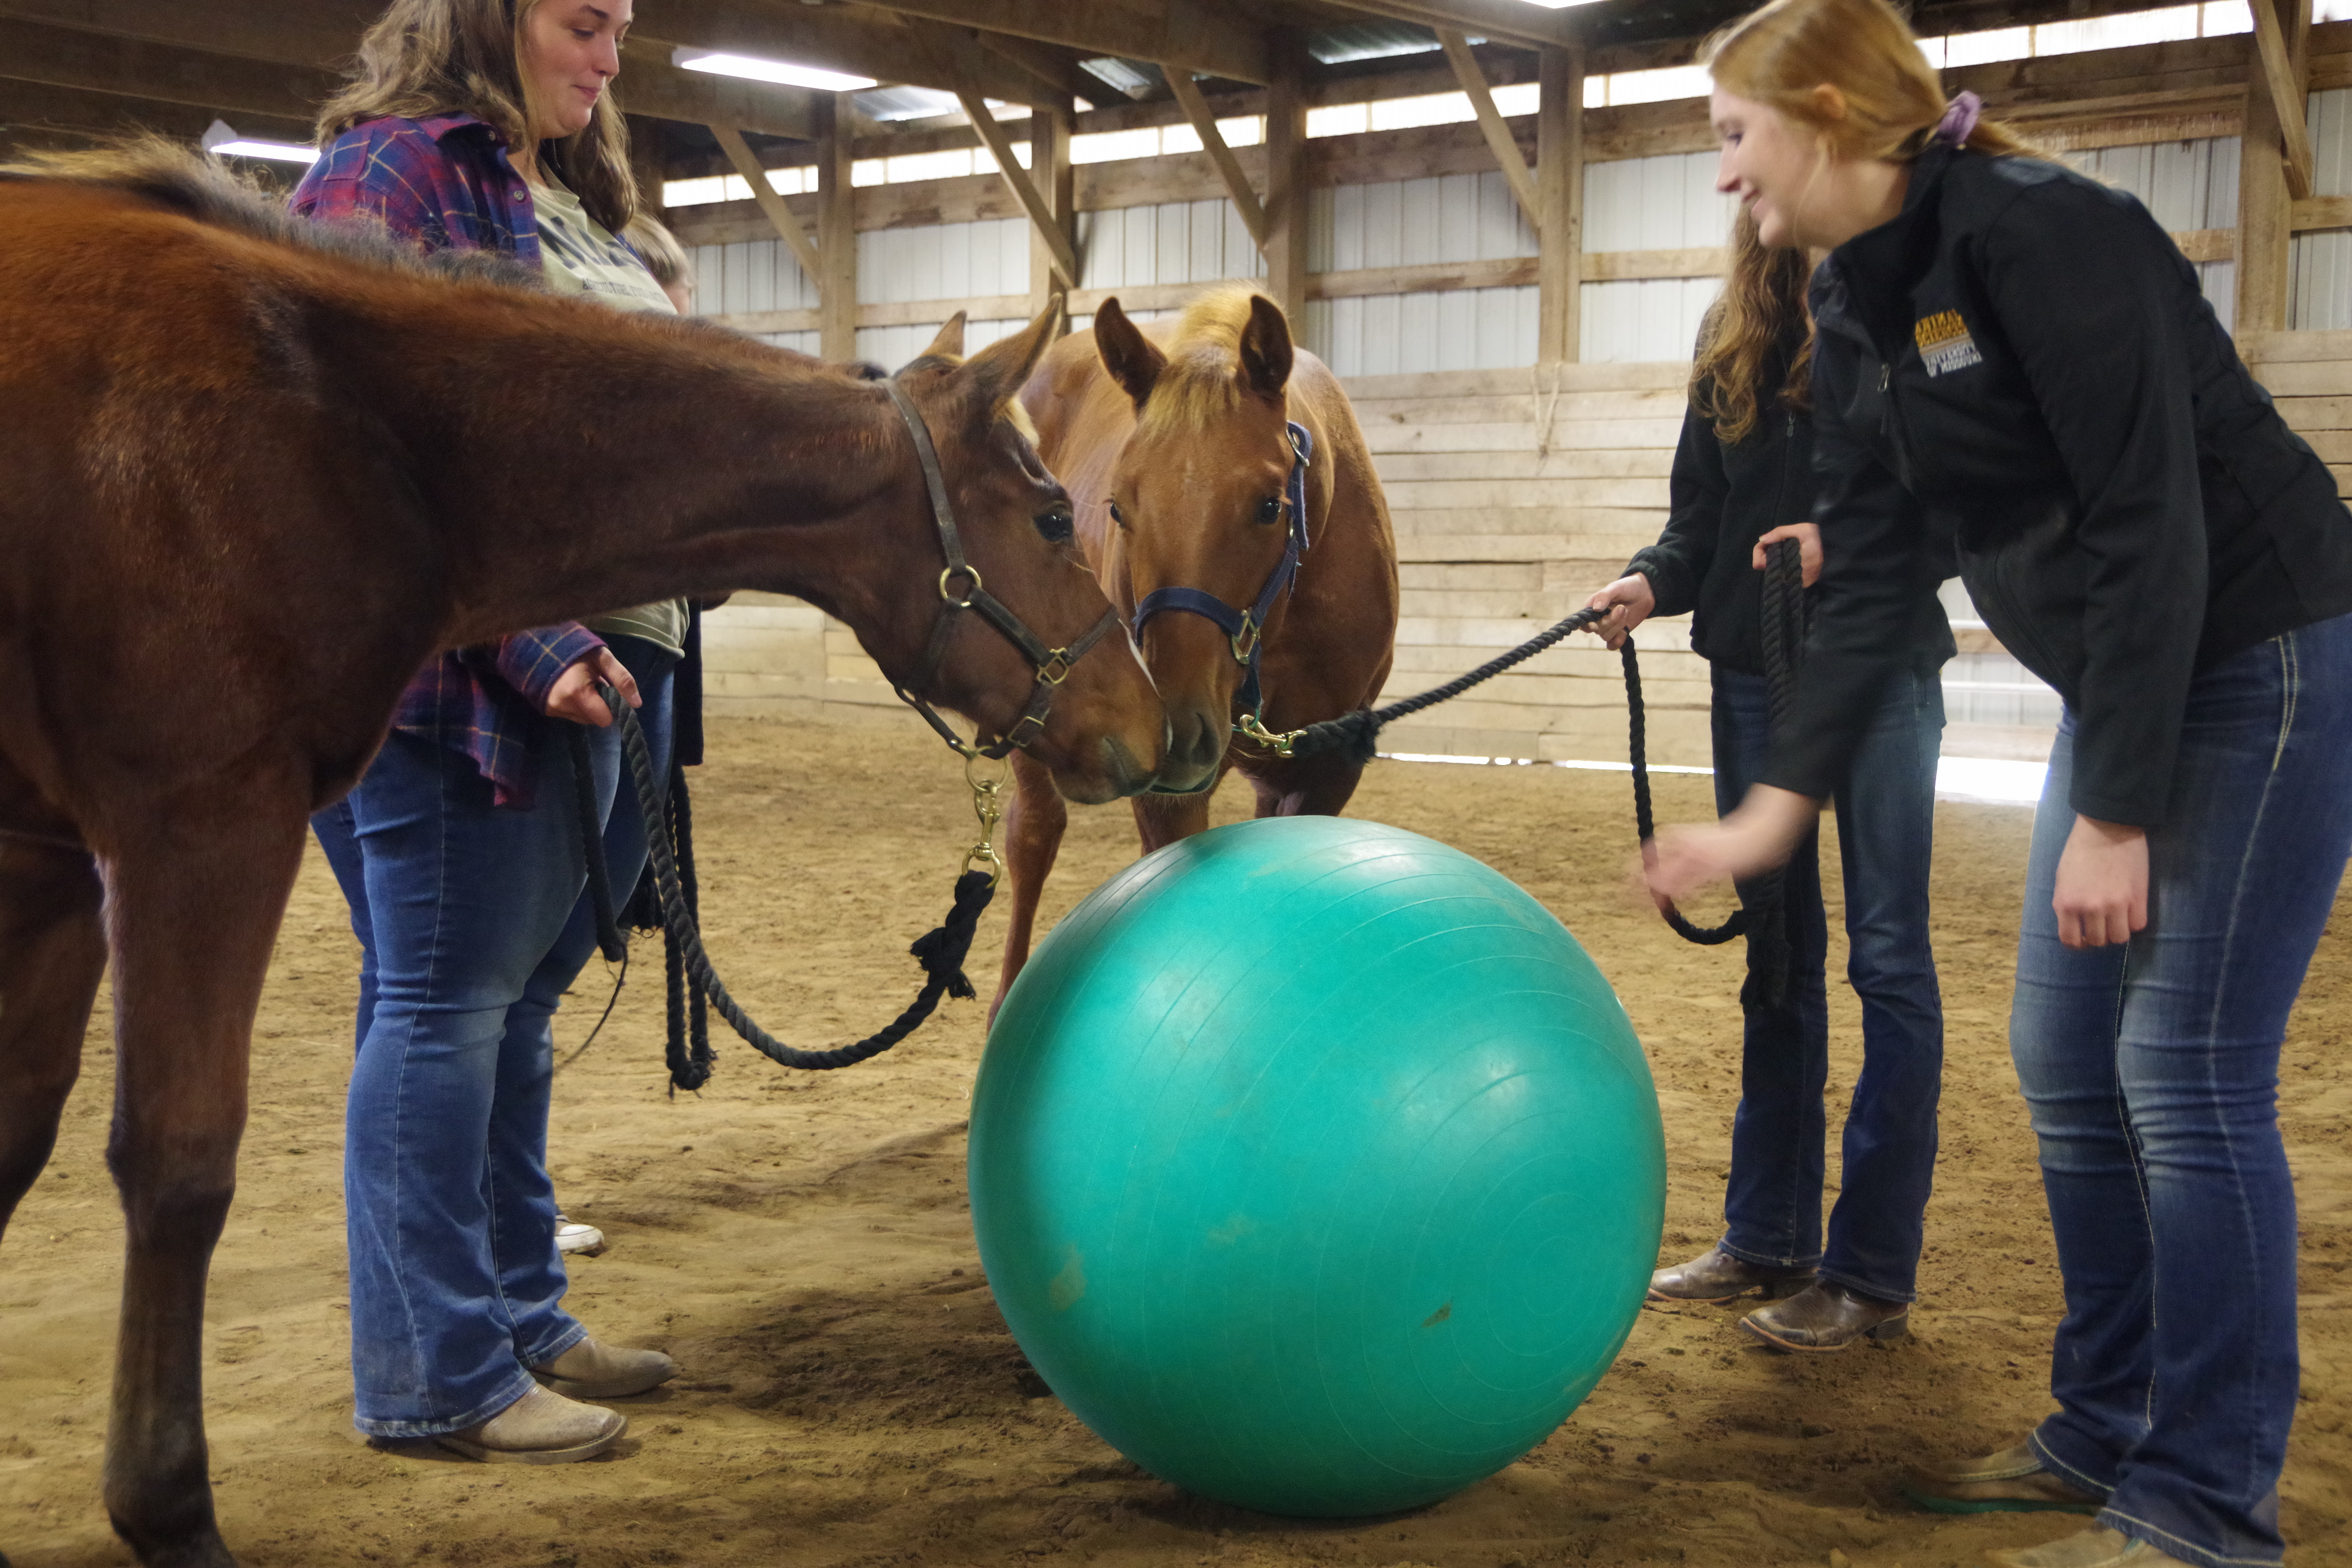 This is a picture of two horses interacting with a ball.